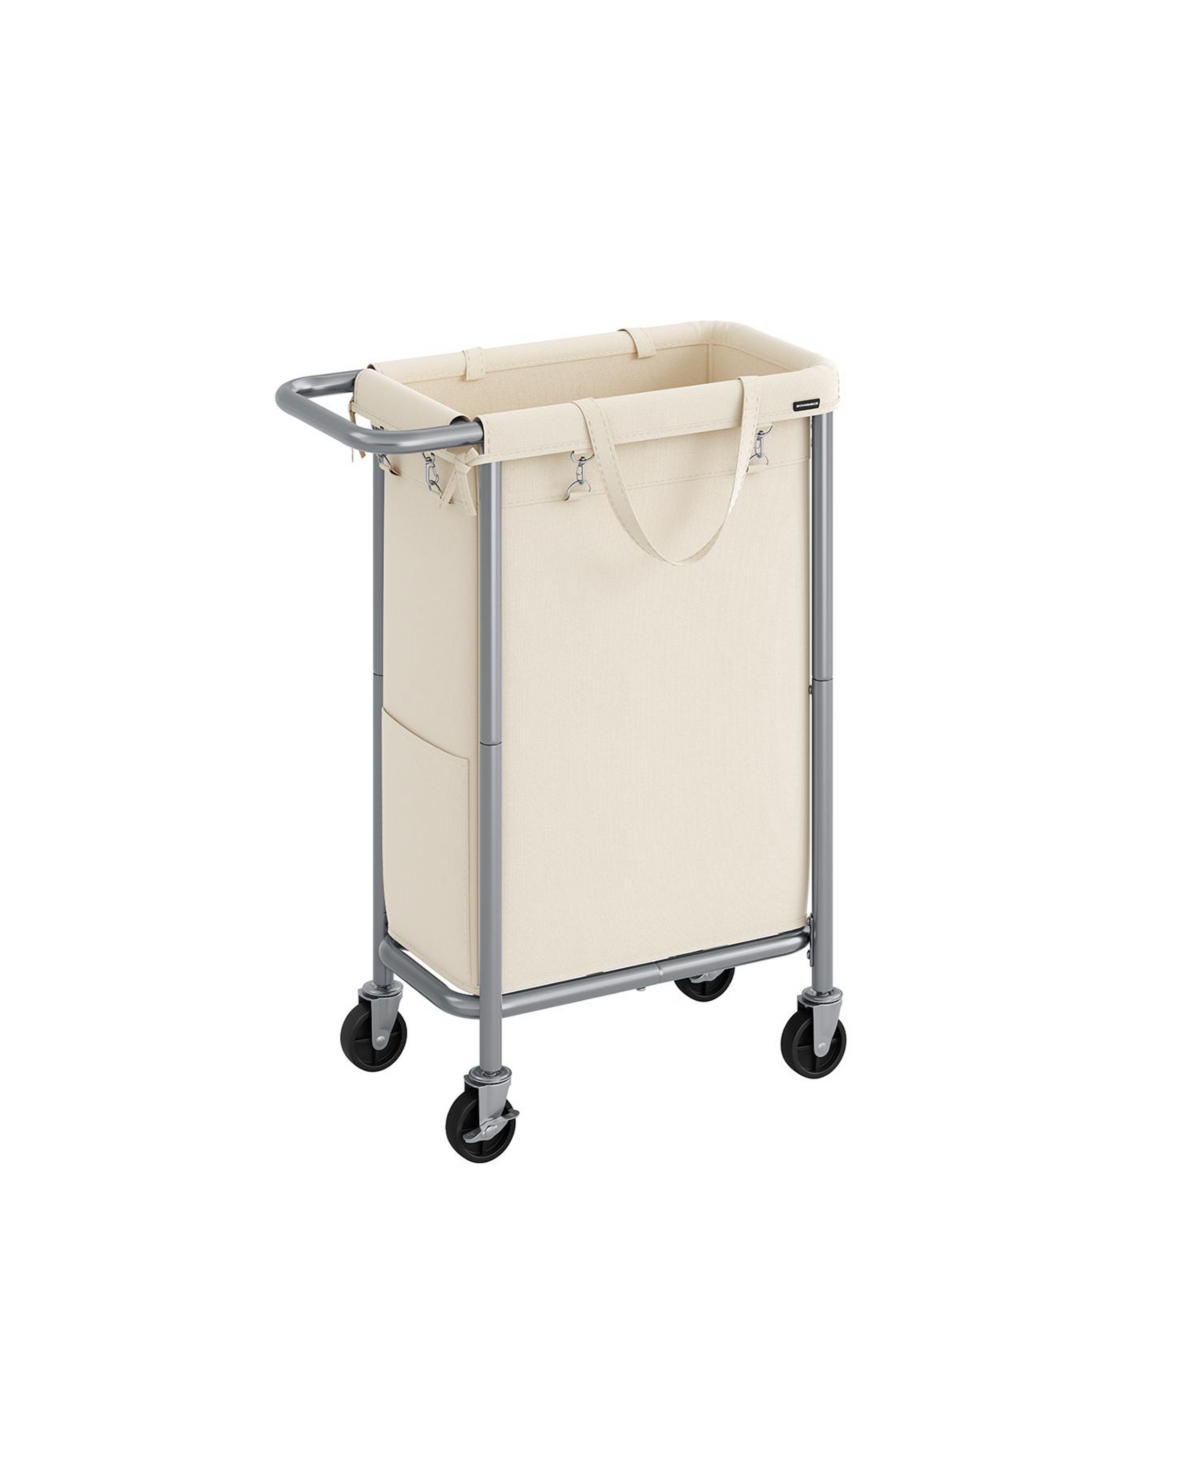 Laundry Basket with Wheels, Rolling Laundry Hamper, emovable Liner, Steel Frame with Handle, Blanket Storage - White